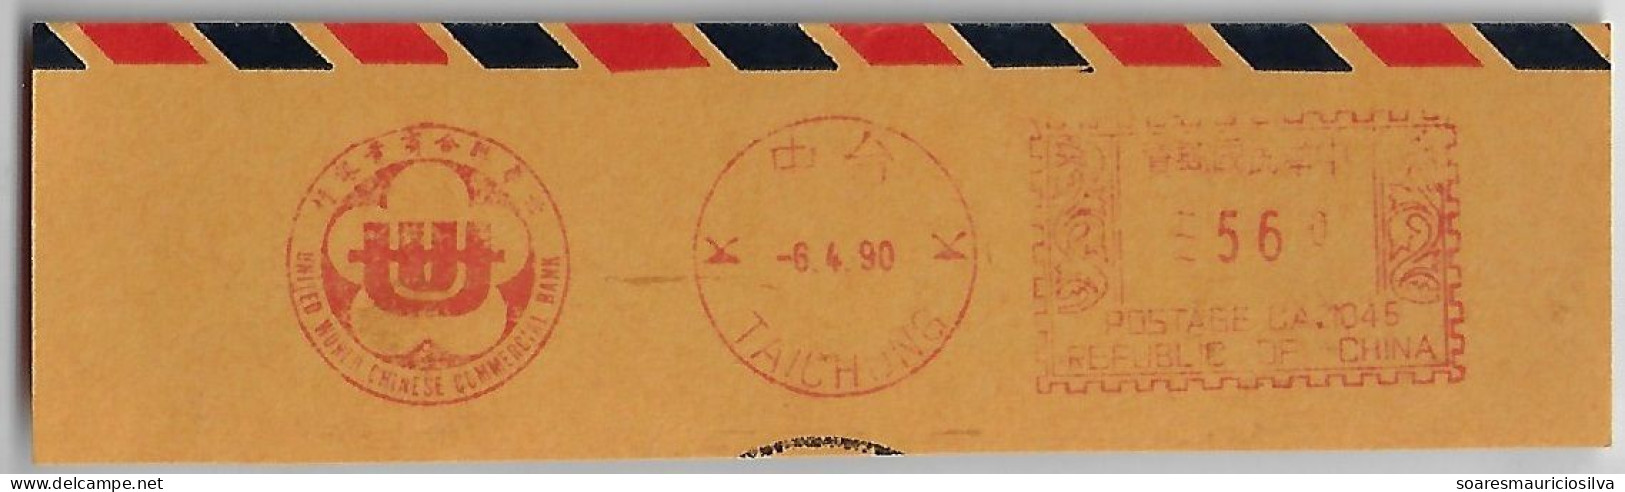 Taiwan 1990 Fragment Meter Stamp Pitney Bowes Slogan United World Chinese Commercial Bank Taichung Flower Plum Blossom - Storia Postale